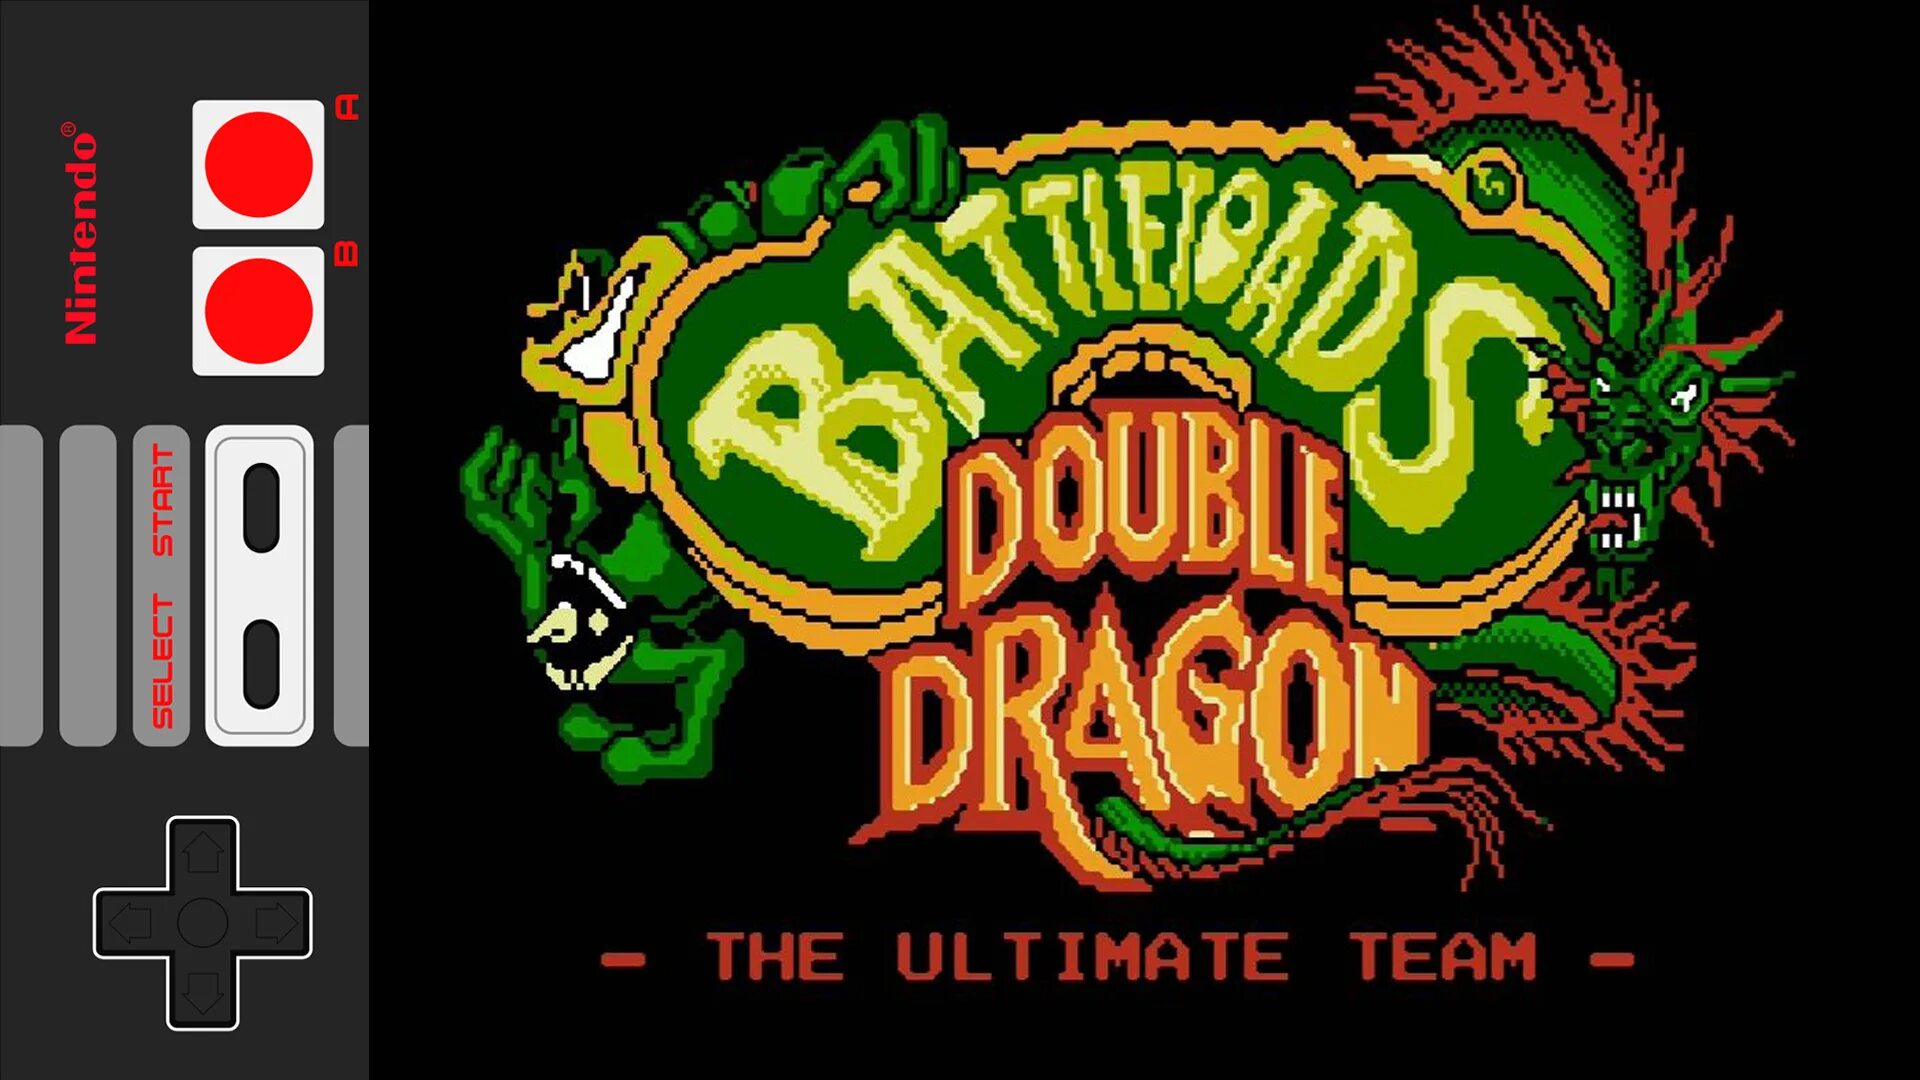 Battletoads Double Dragon the Ultimate Team NES. Battletoads & Double Dragon - the Ultimate Team. Battletoads Double Dragon Денди. Battletoads Double Dragon Sega. Battletoads ultimate